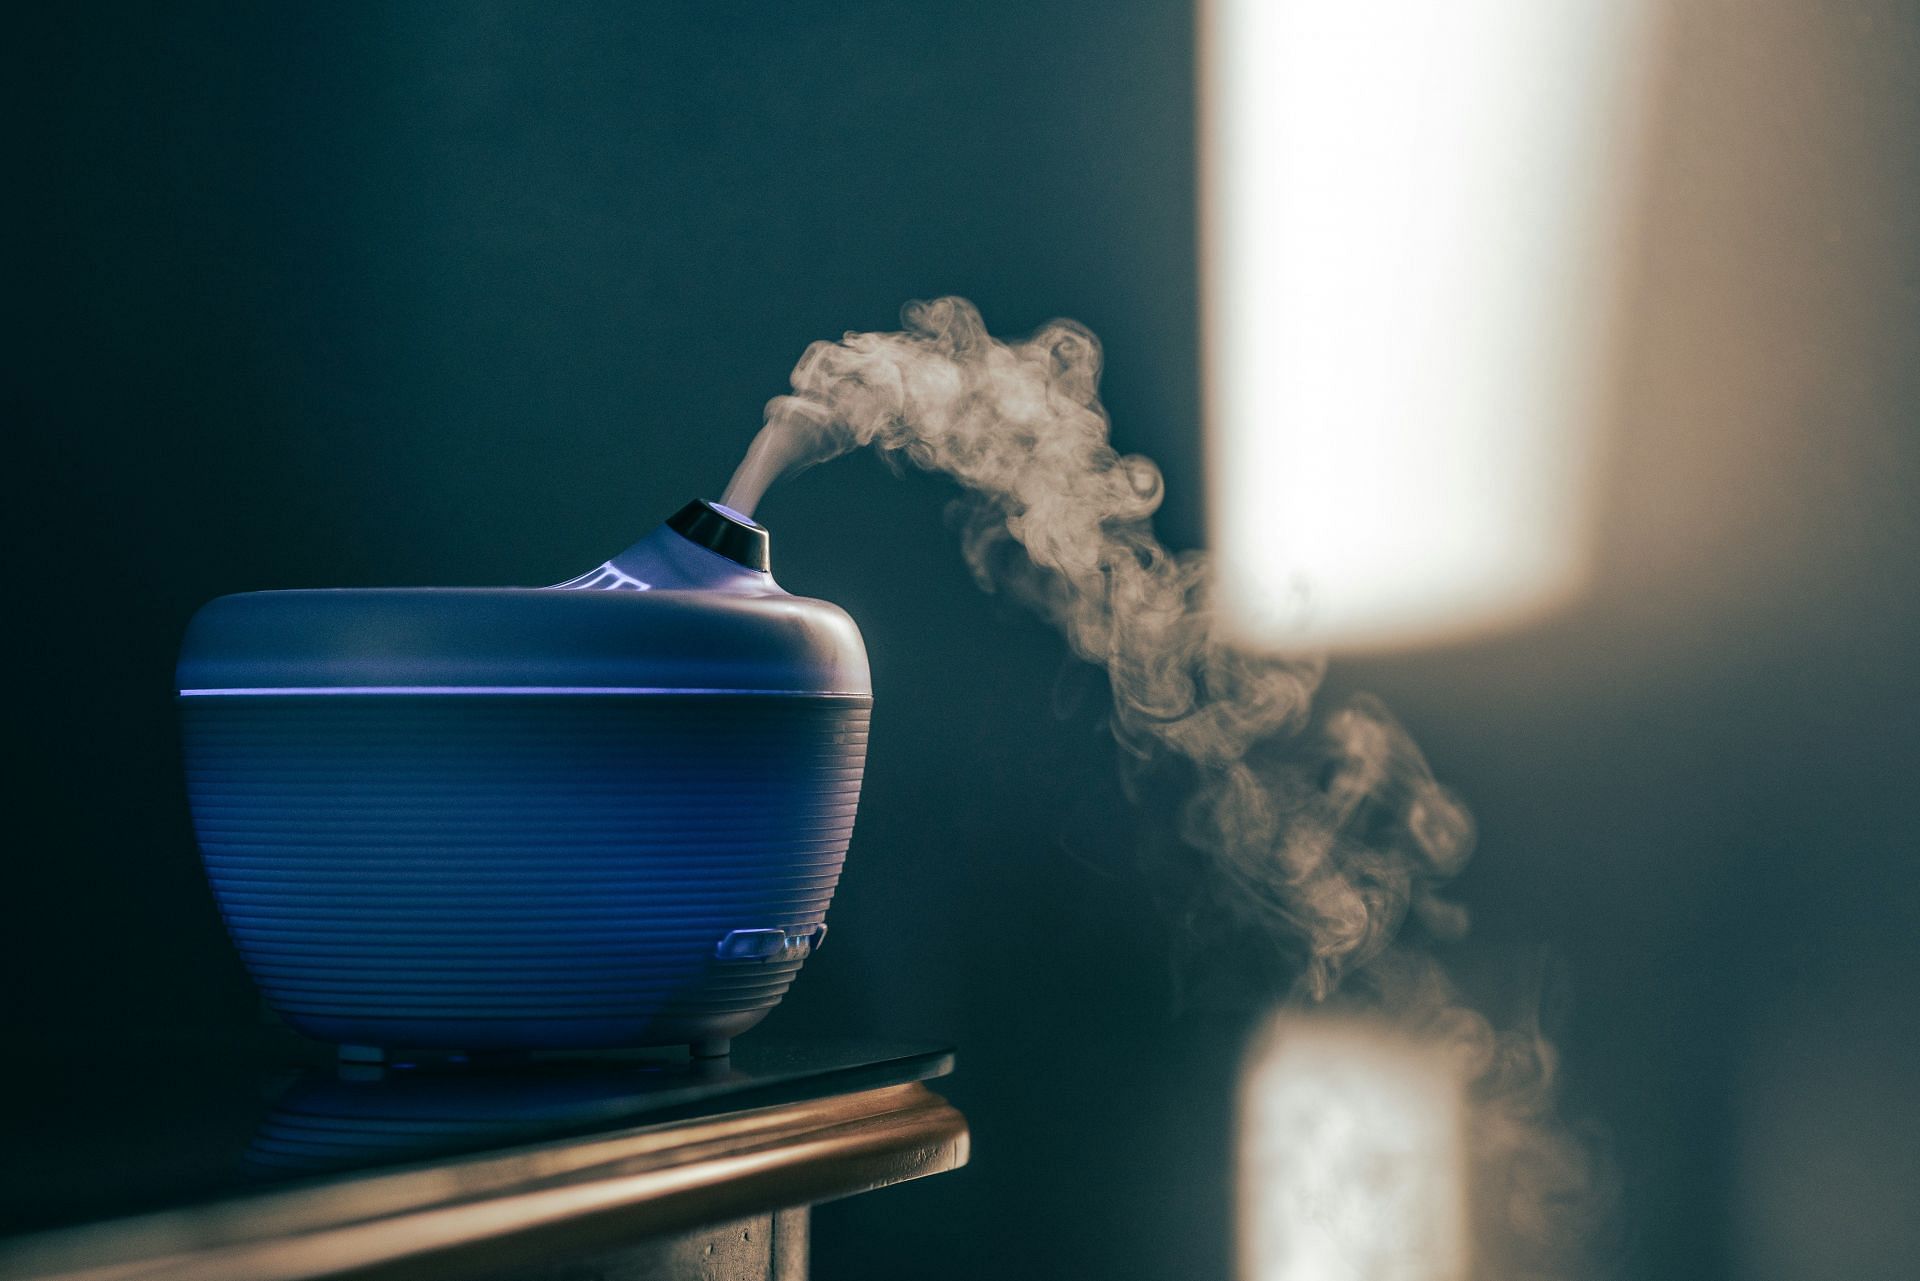 Used for aromatherapy (Image by Jopeel Quimpo/Unsplash)